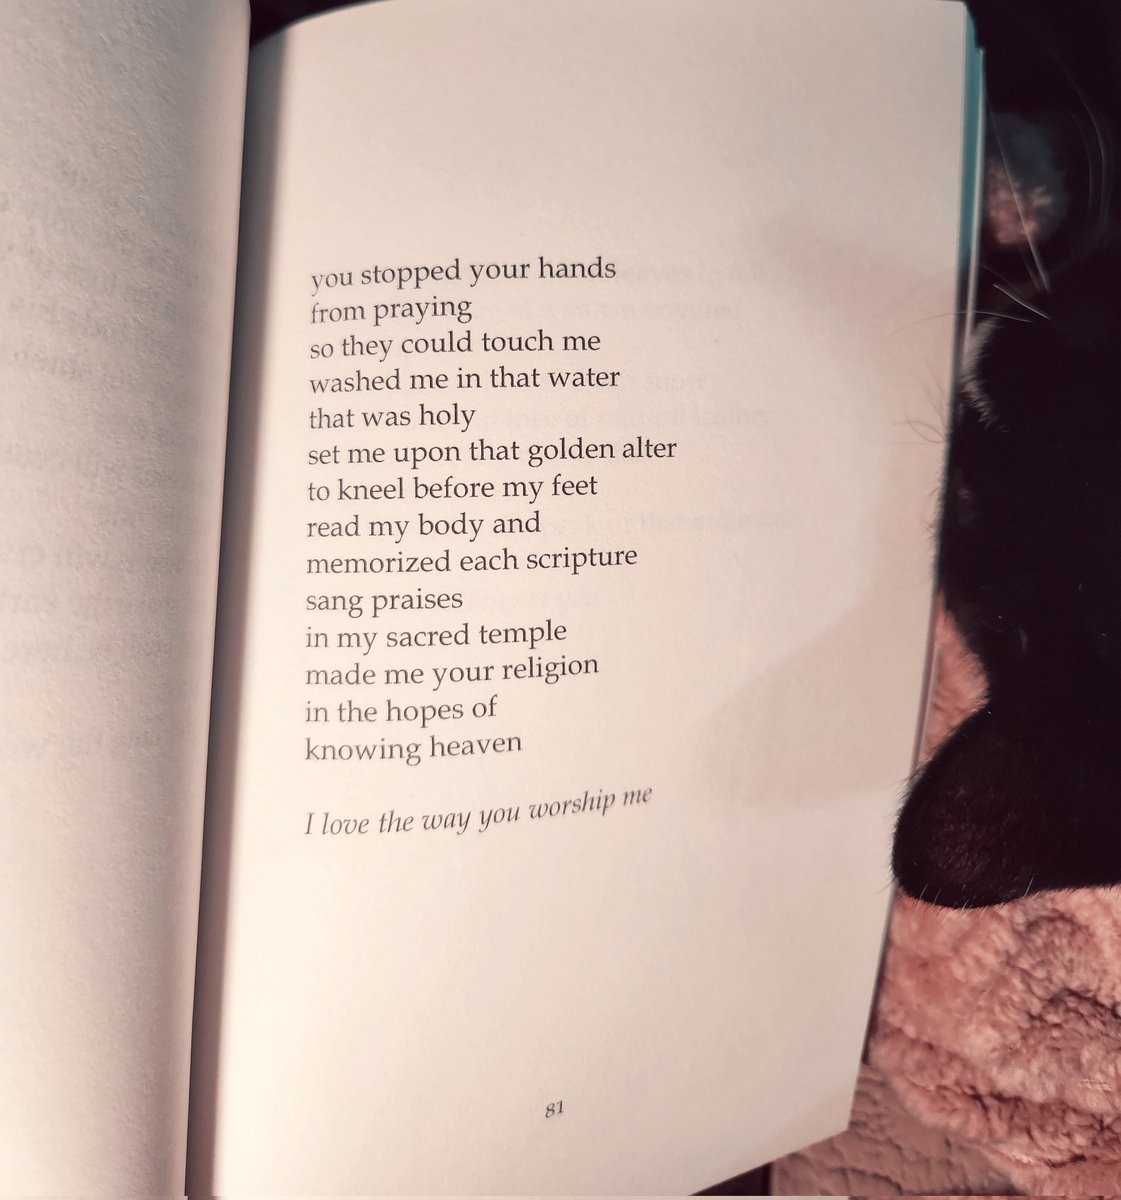 ♥️♥️♥️From 'When I Look at You' to be released 2/10, or available for pre-order now on #Amazon 

#poetrycommunity #poetrylover #book #BookTwitter #booklover #books #love #lovepoems #poet #writingcommunity #author #writer #writing #art #kindle #ebook #kindleunlimited #giftidea